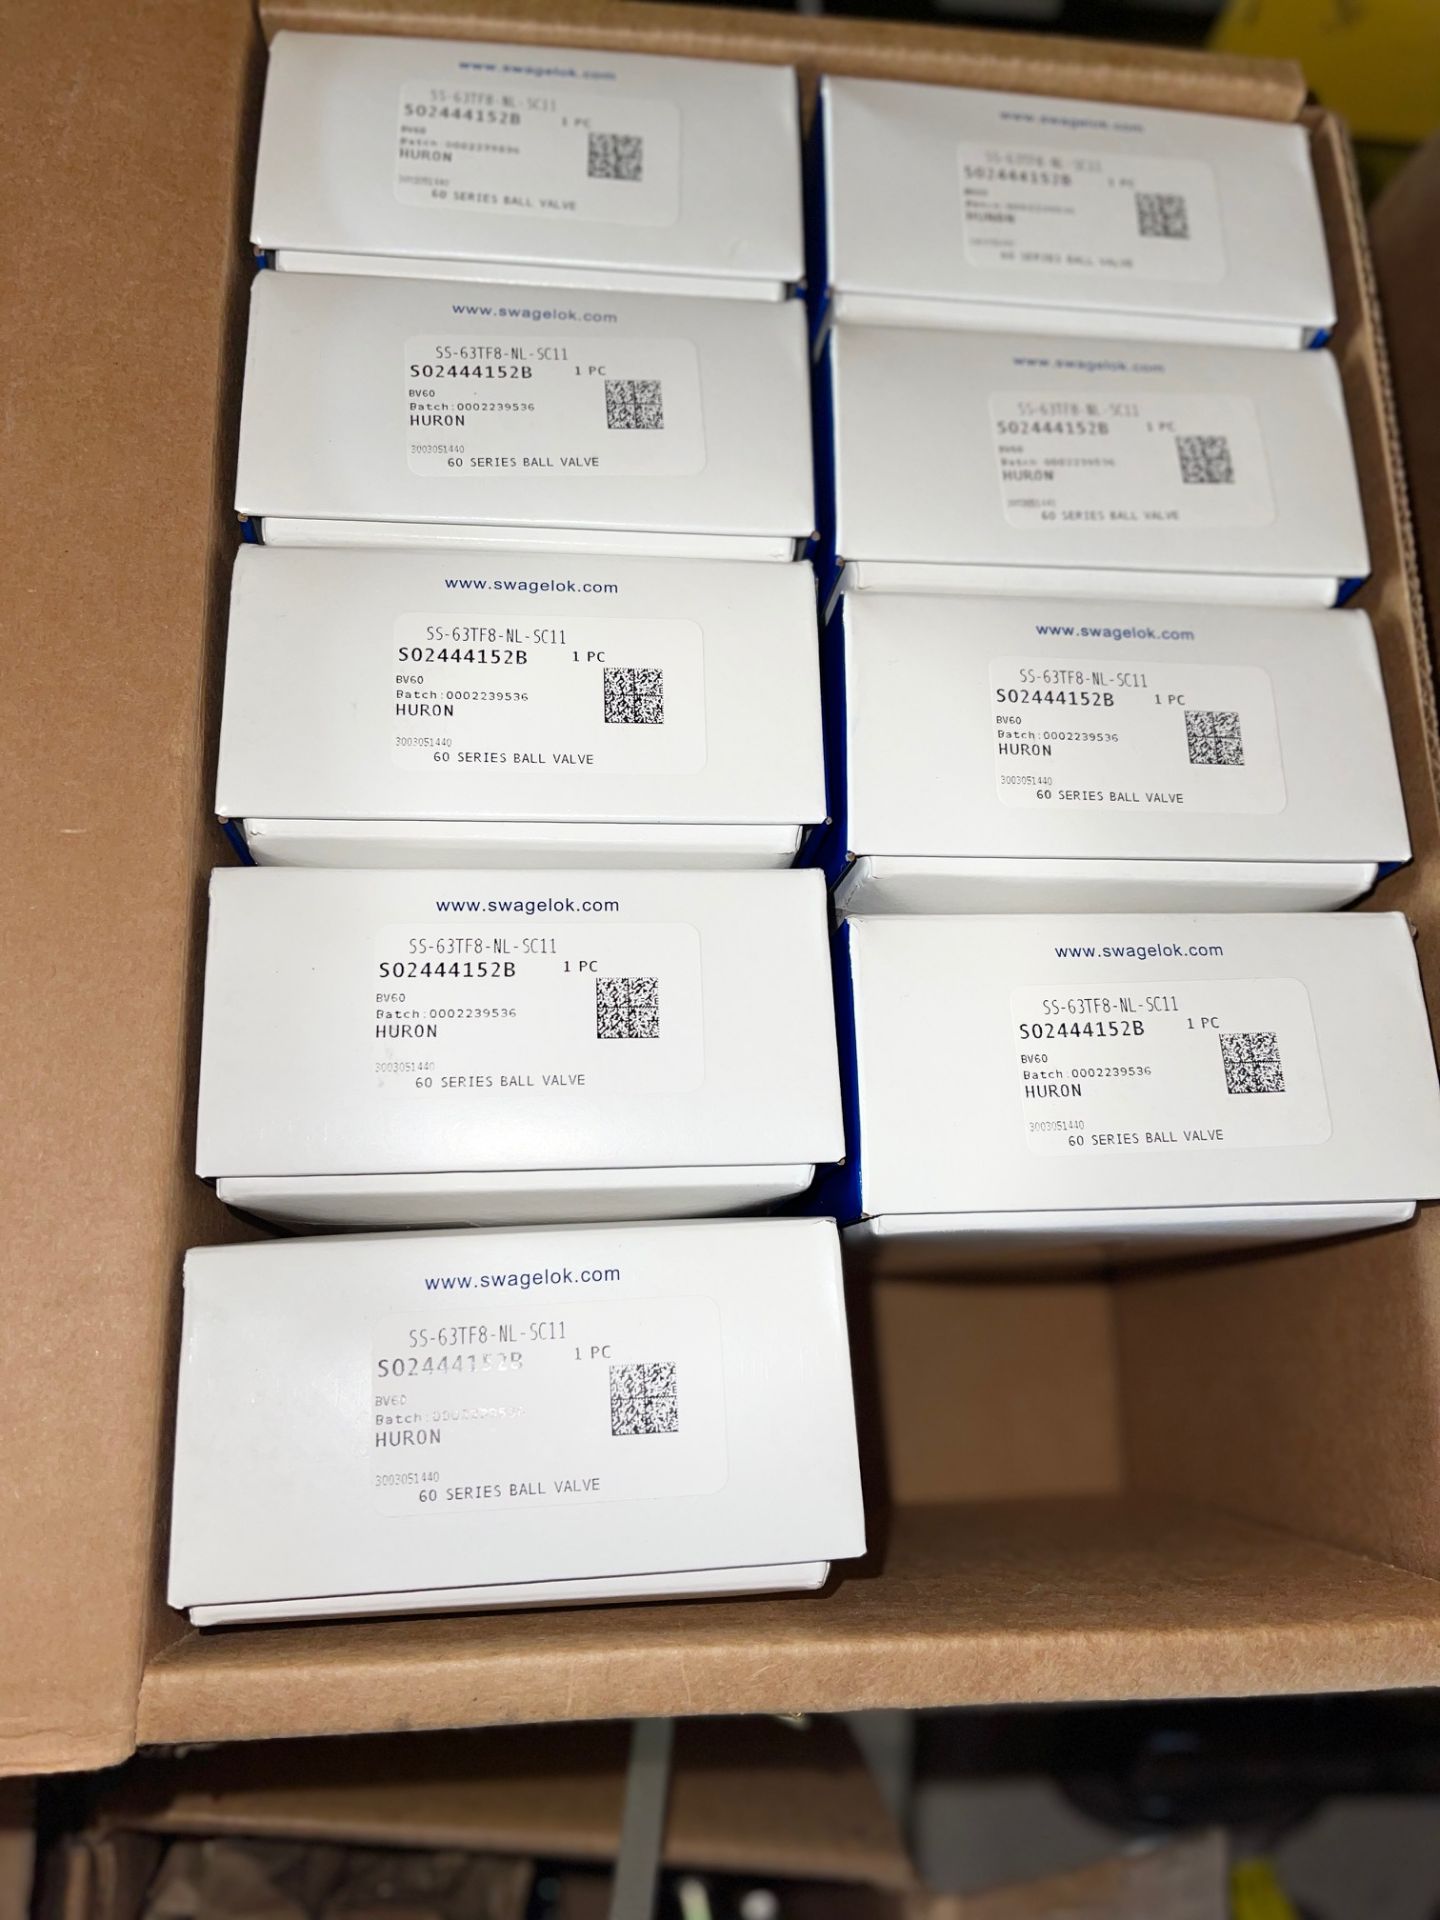 20 TIMES SS DASH63TF8 DASH NL DASH FC11, SERIES 60 S/S SWAGELOK, BALL VALVES, NEW IN BOXES 20 - Image 2 of 3